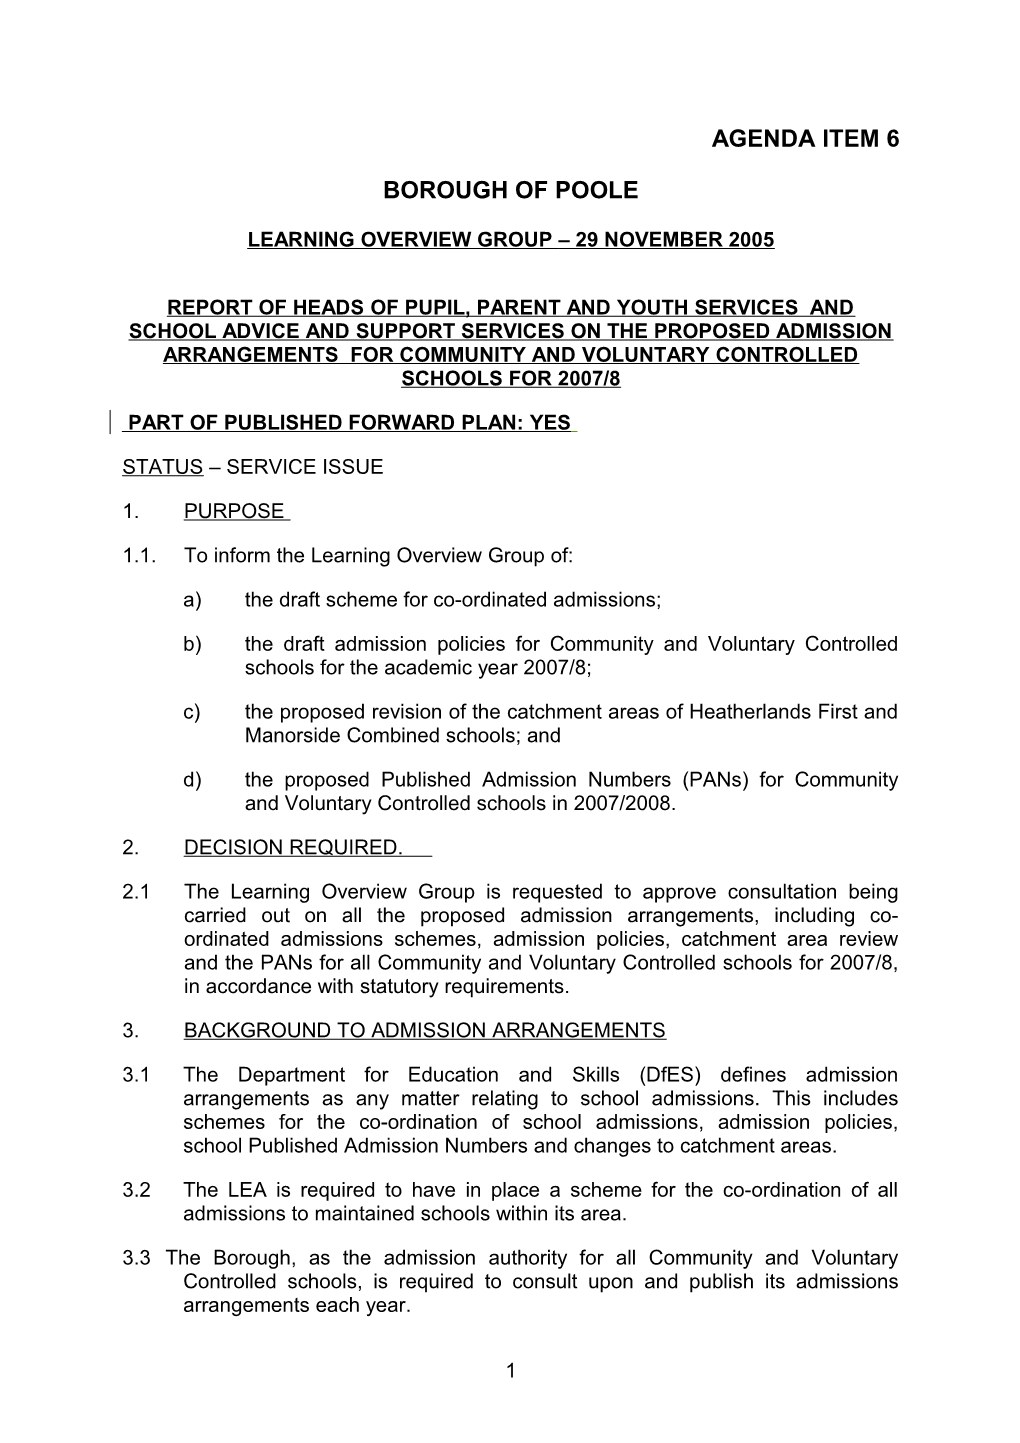 Proposed Admission Arrangements for Community and Voluntary Controlled Schools for 2007/8